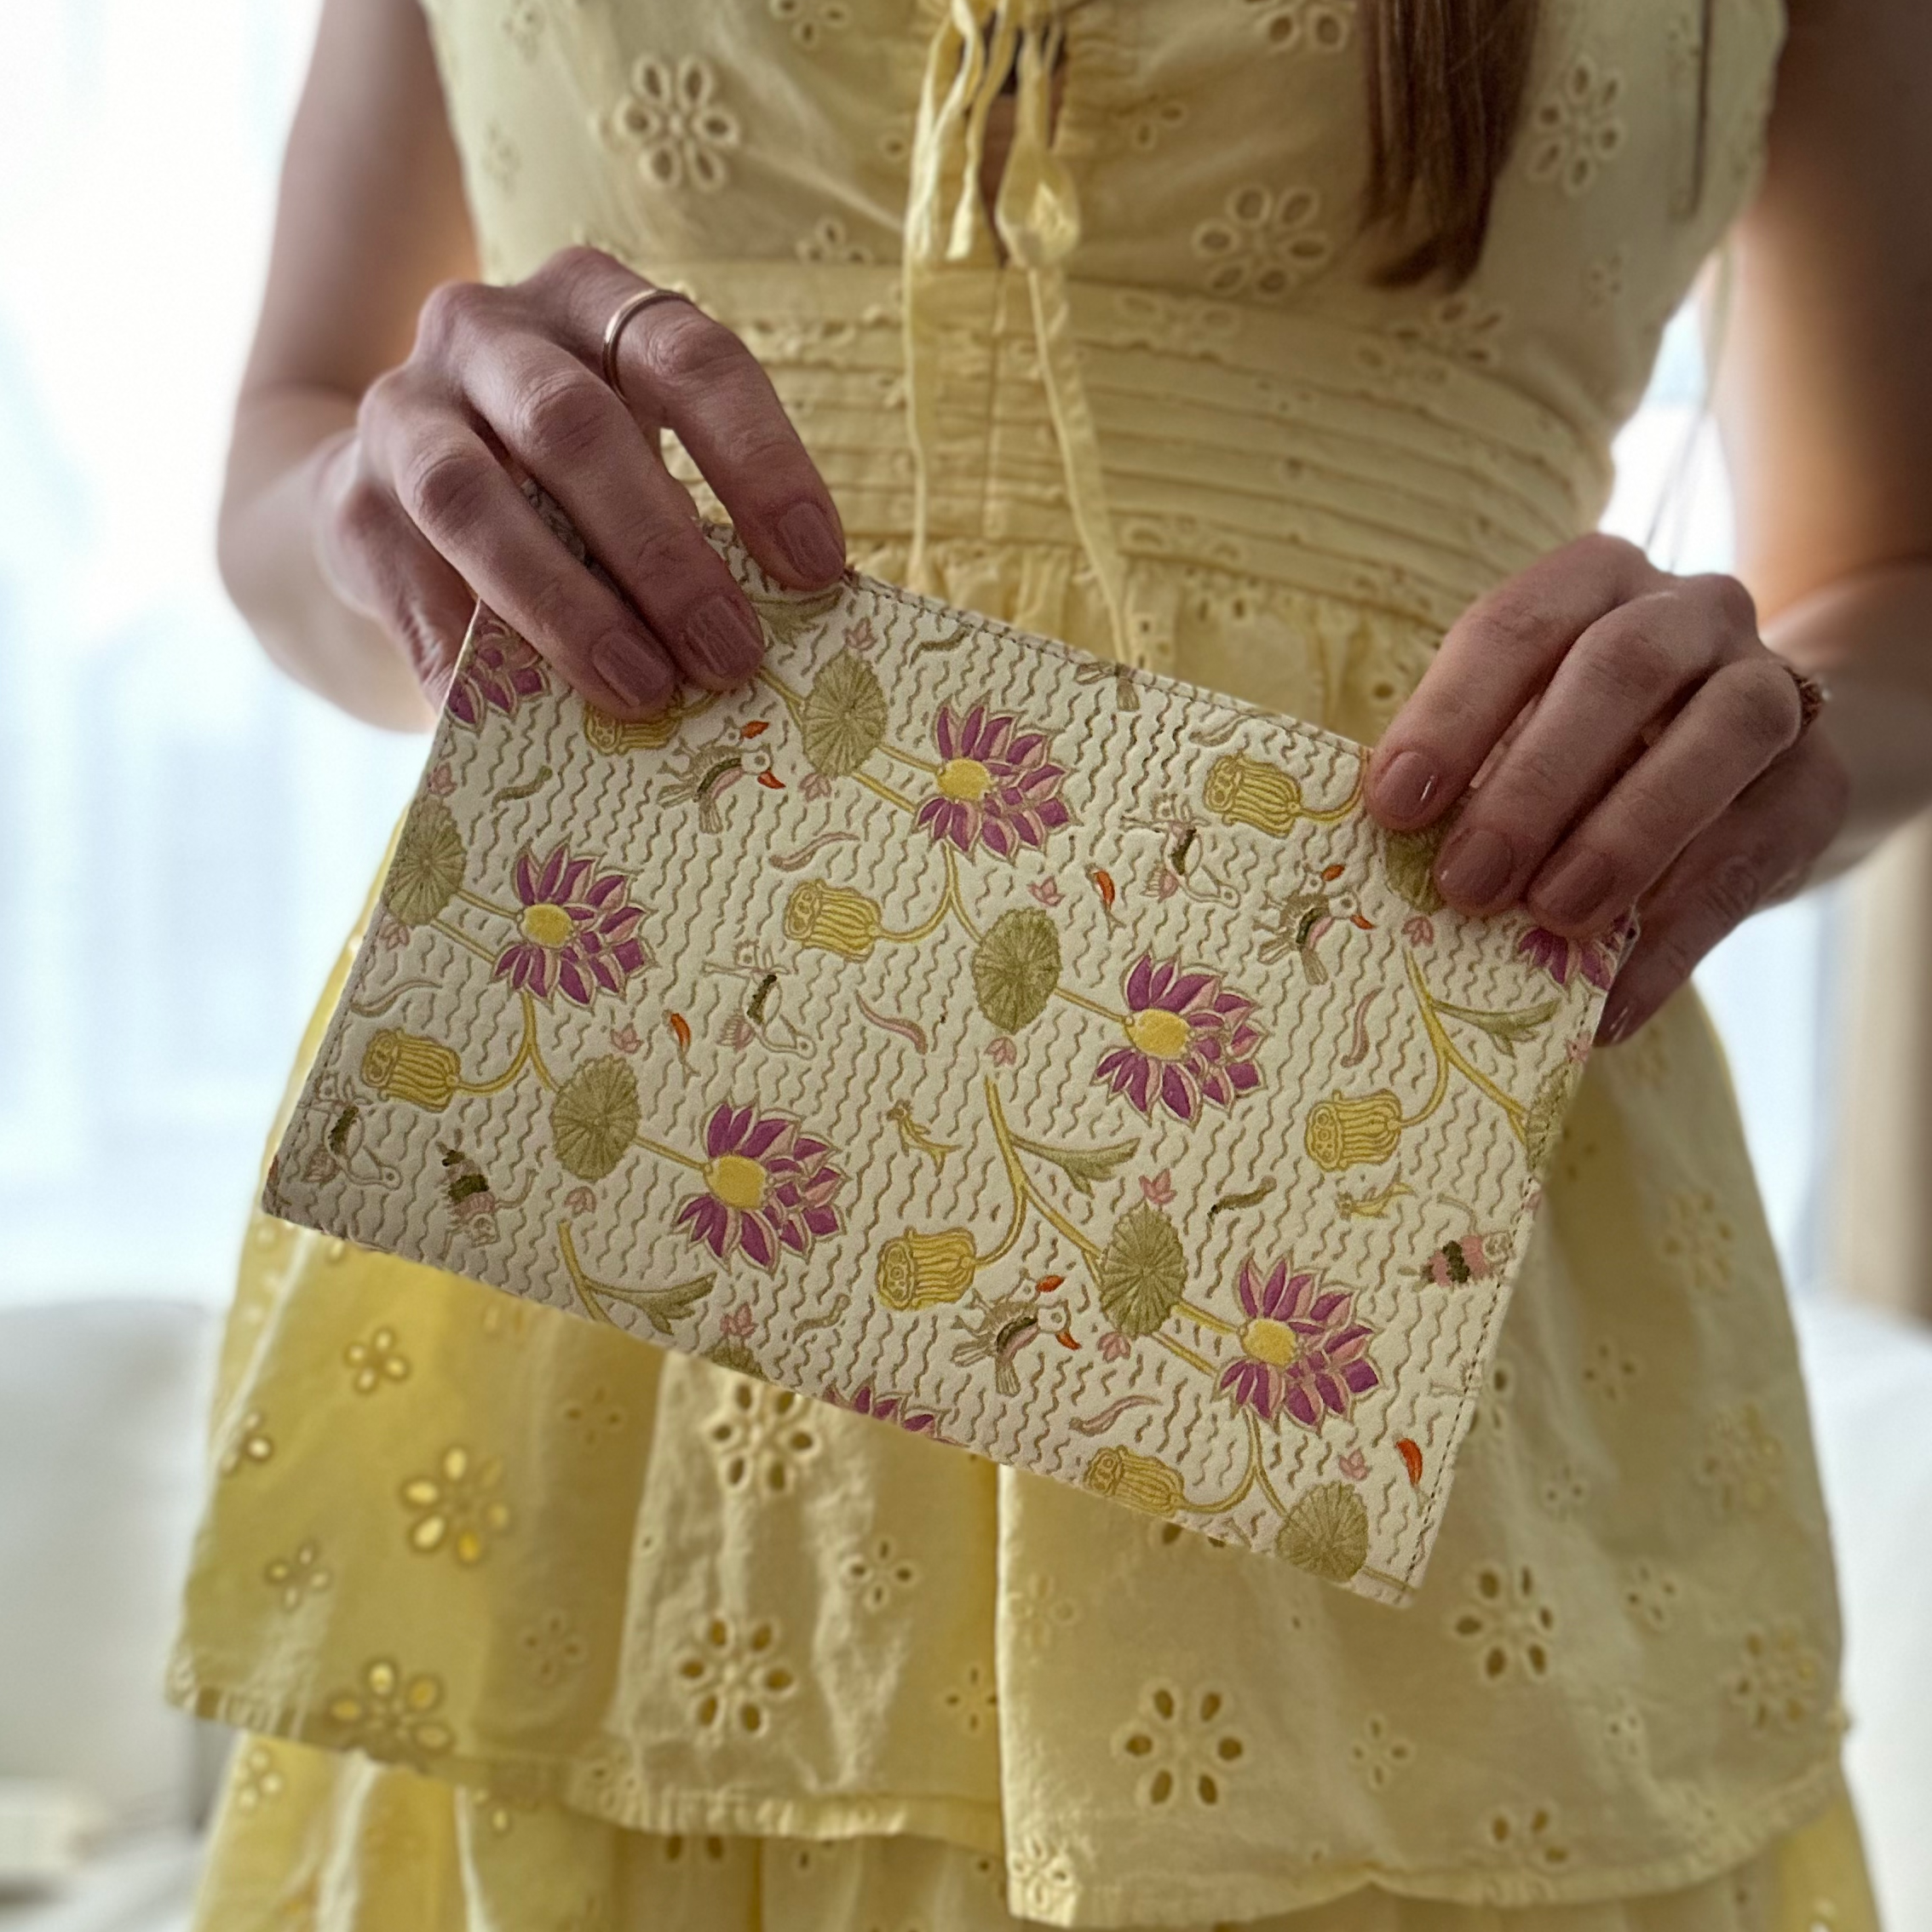 Handmade and Handpainted Floral Clutch